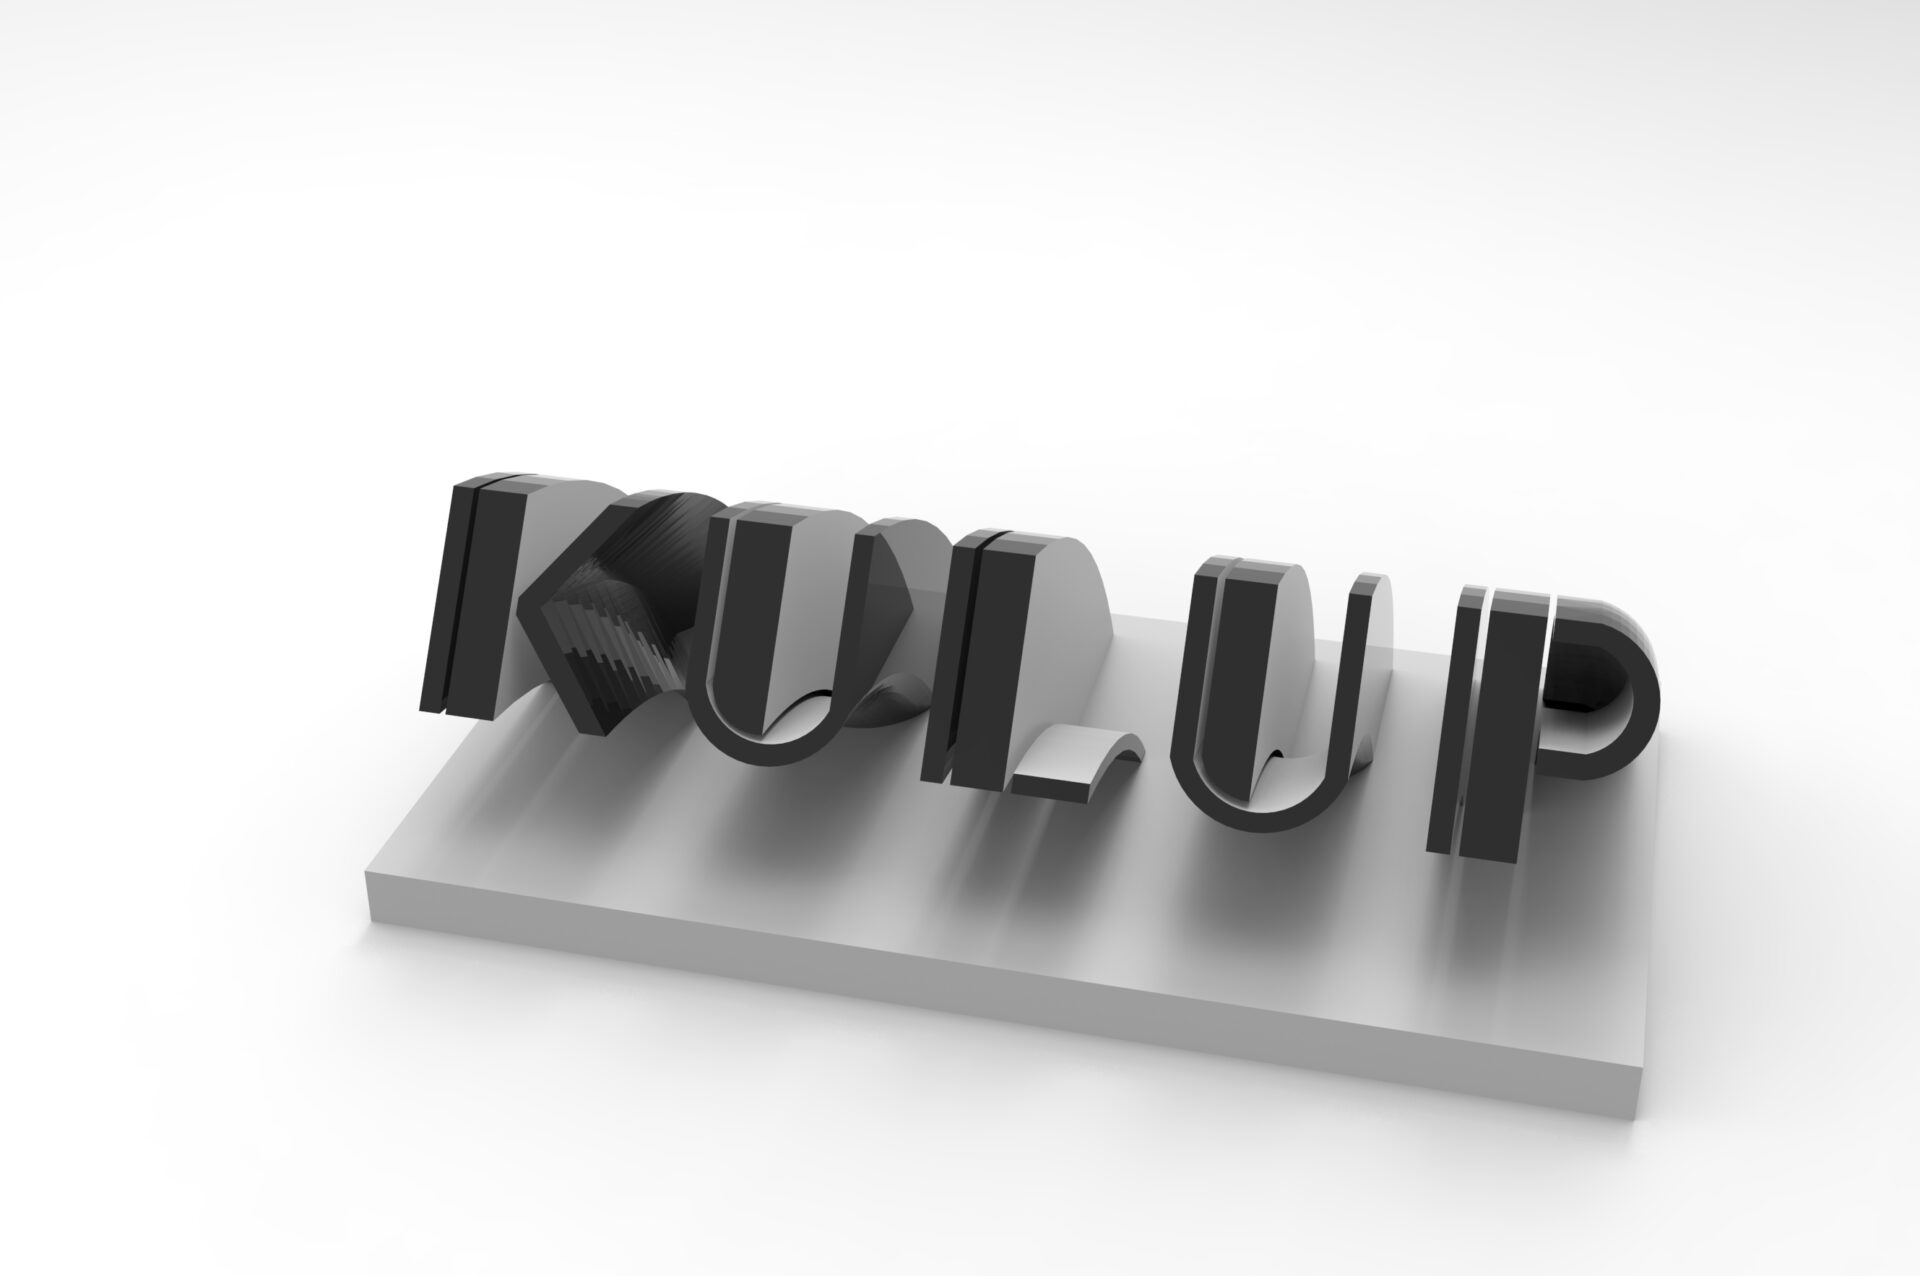 ornament-with-kulup-written